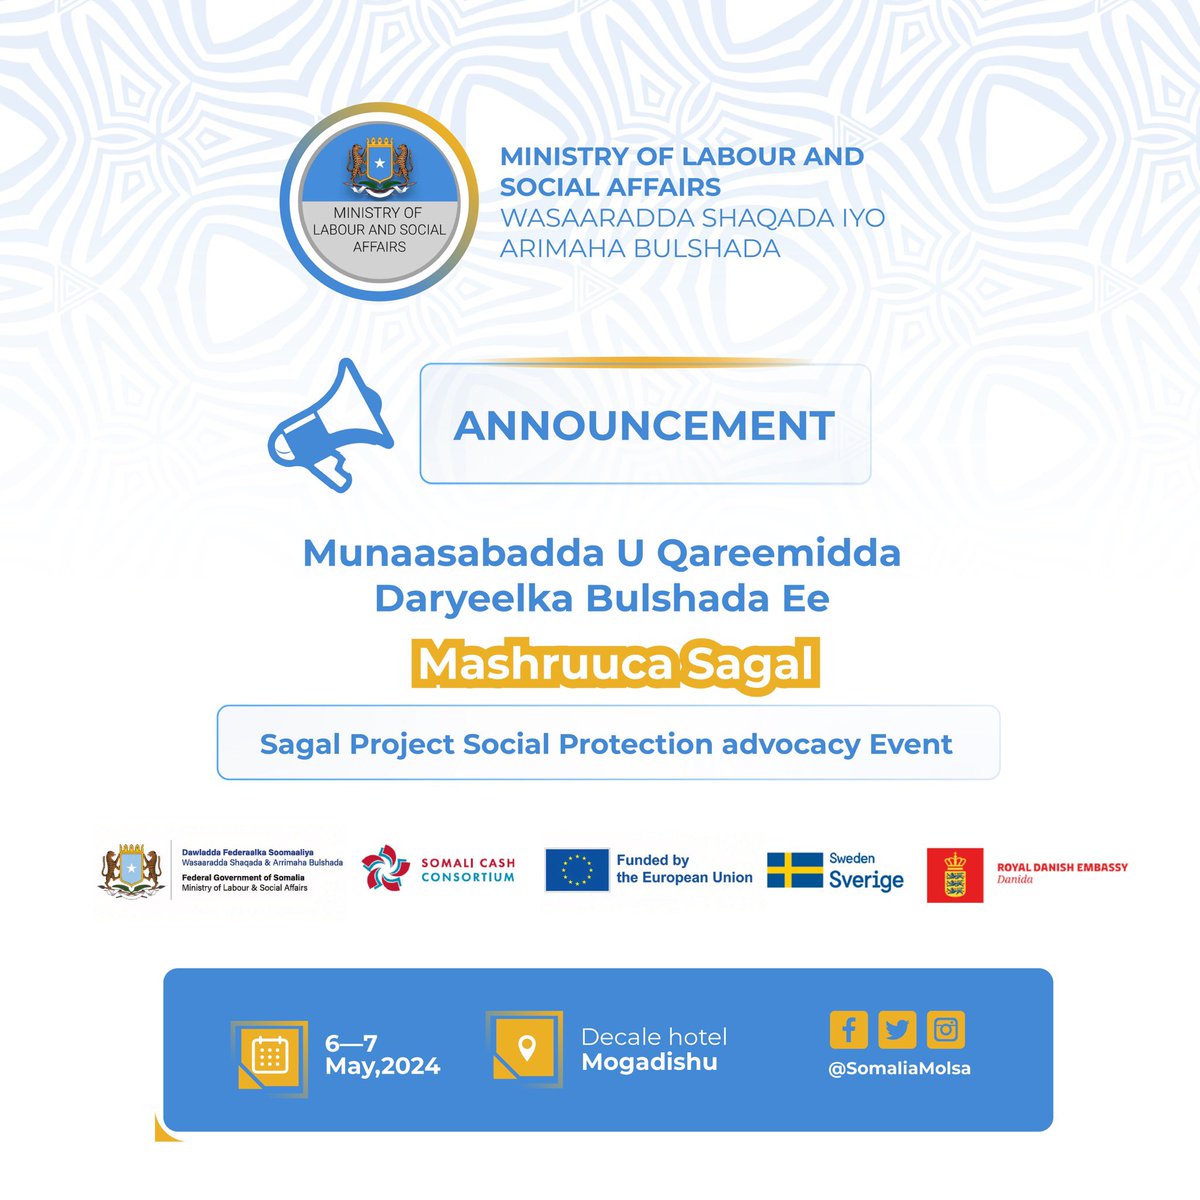 📢 Save the date! @SomaliaMolsa invites you to the Sagal Project Social Protection Advocacy Event at Decale Hotel on May 6th-7th, 2024. Let's collaborate and advance social protection initiatives for a brighter future in Somalia. Stay tuned for updates!#SocialProtection #Somalia.